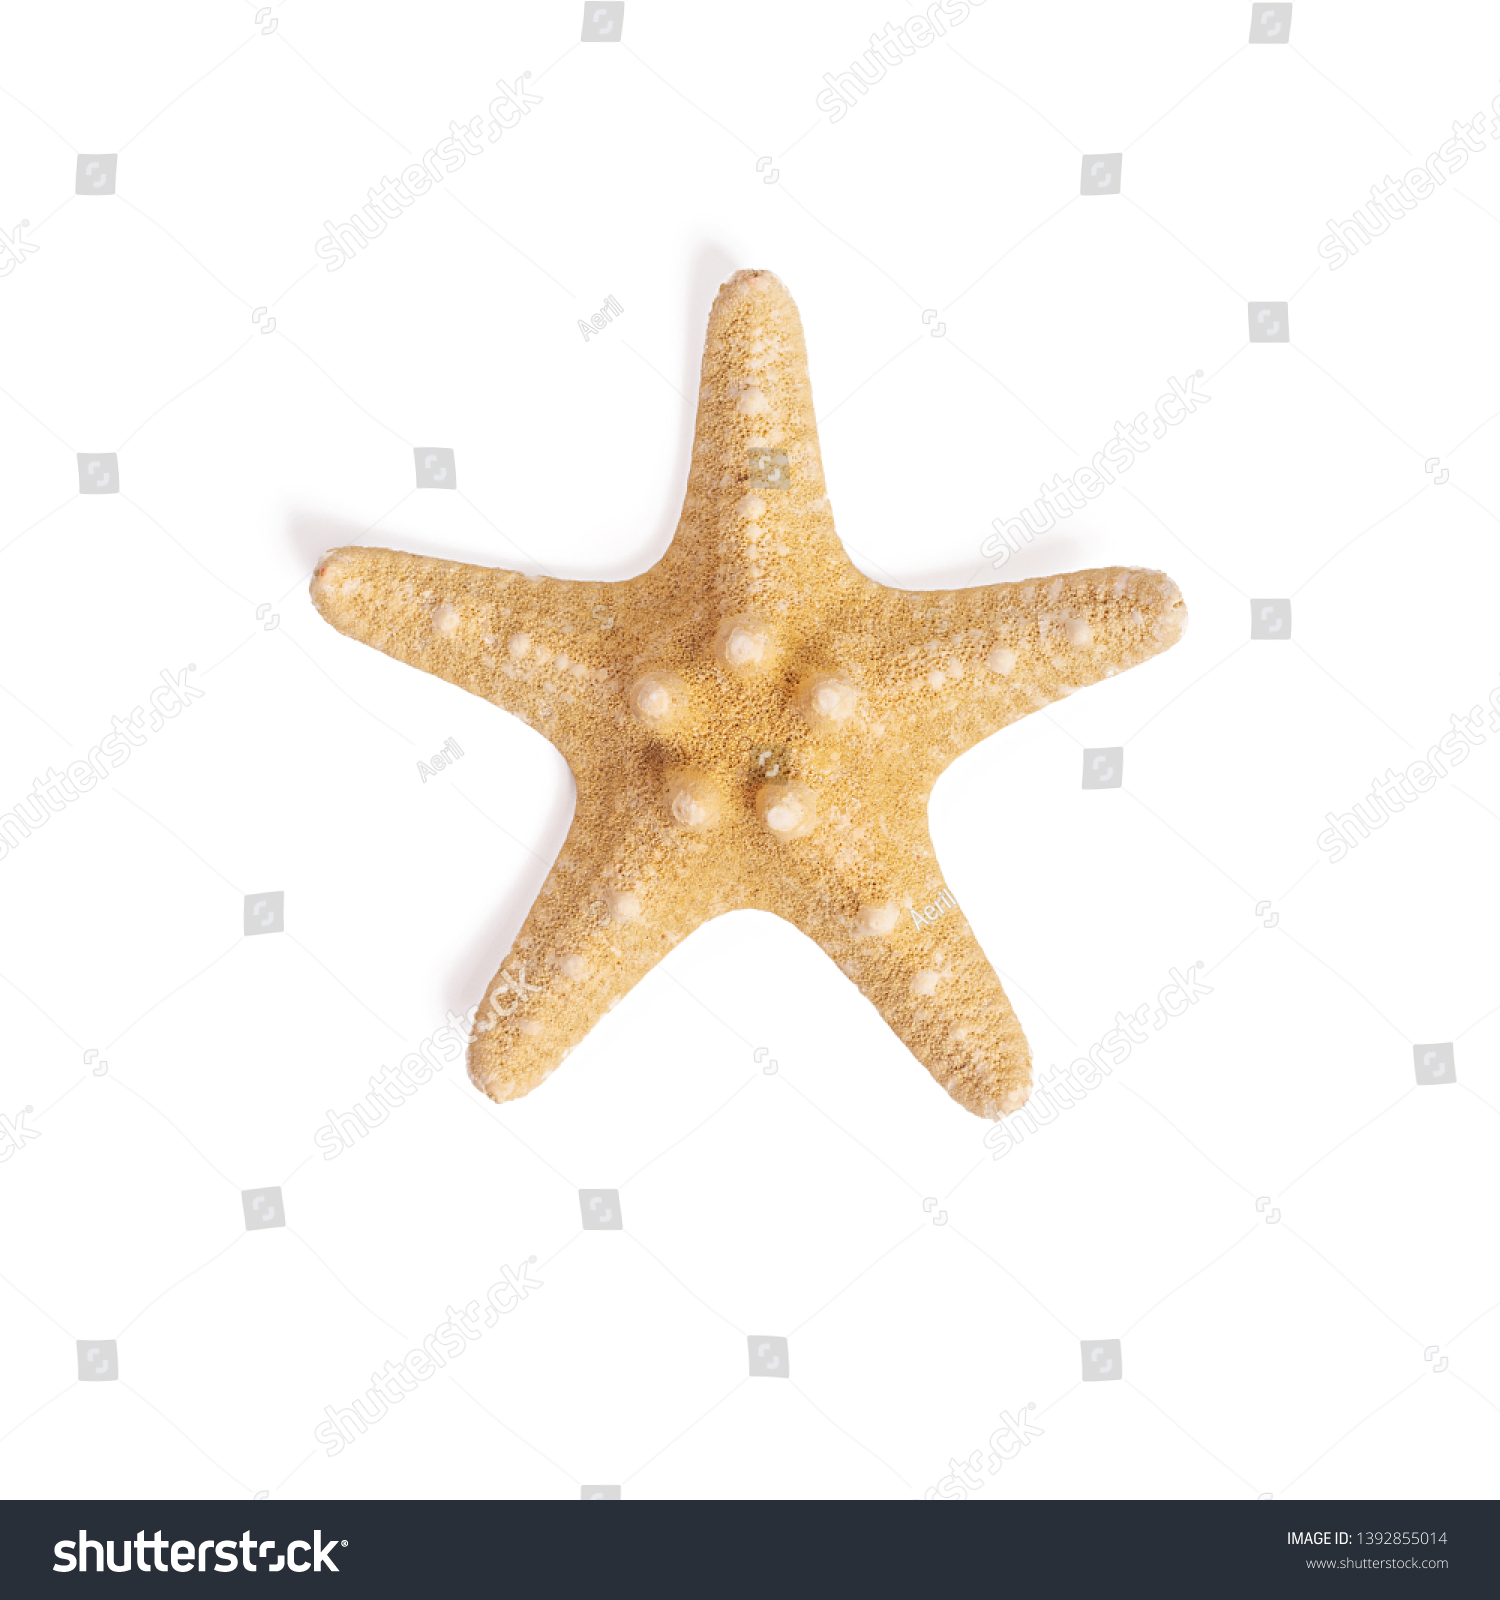 Isolated starfish on white background.Top view #1392855014